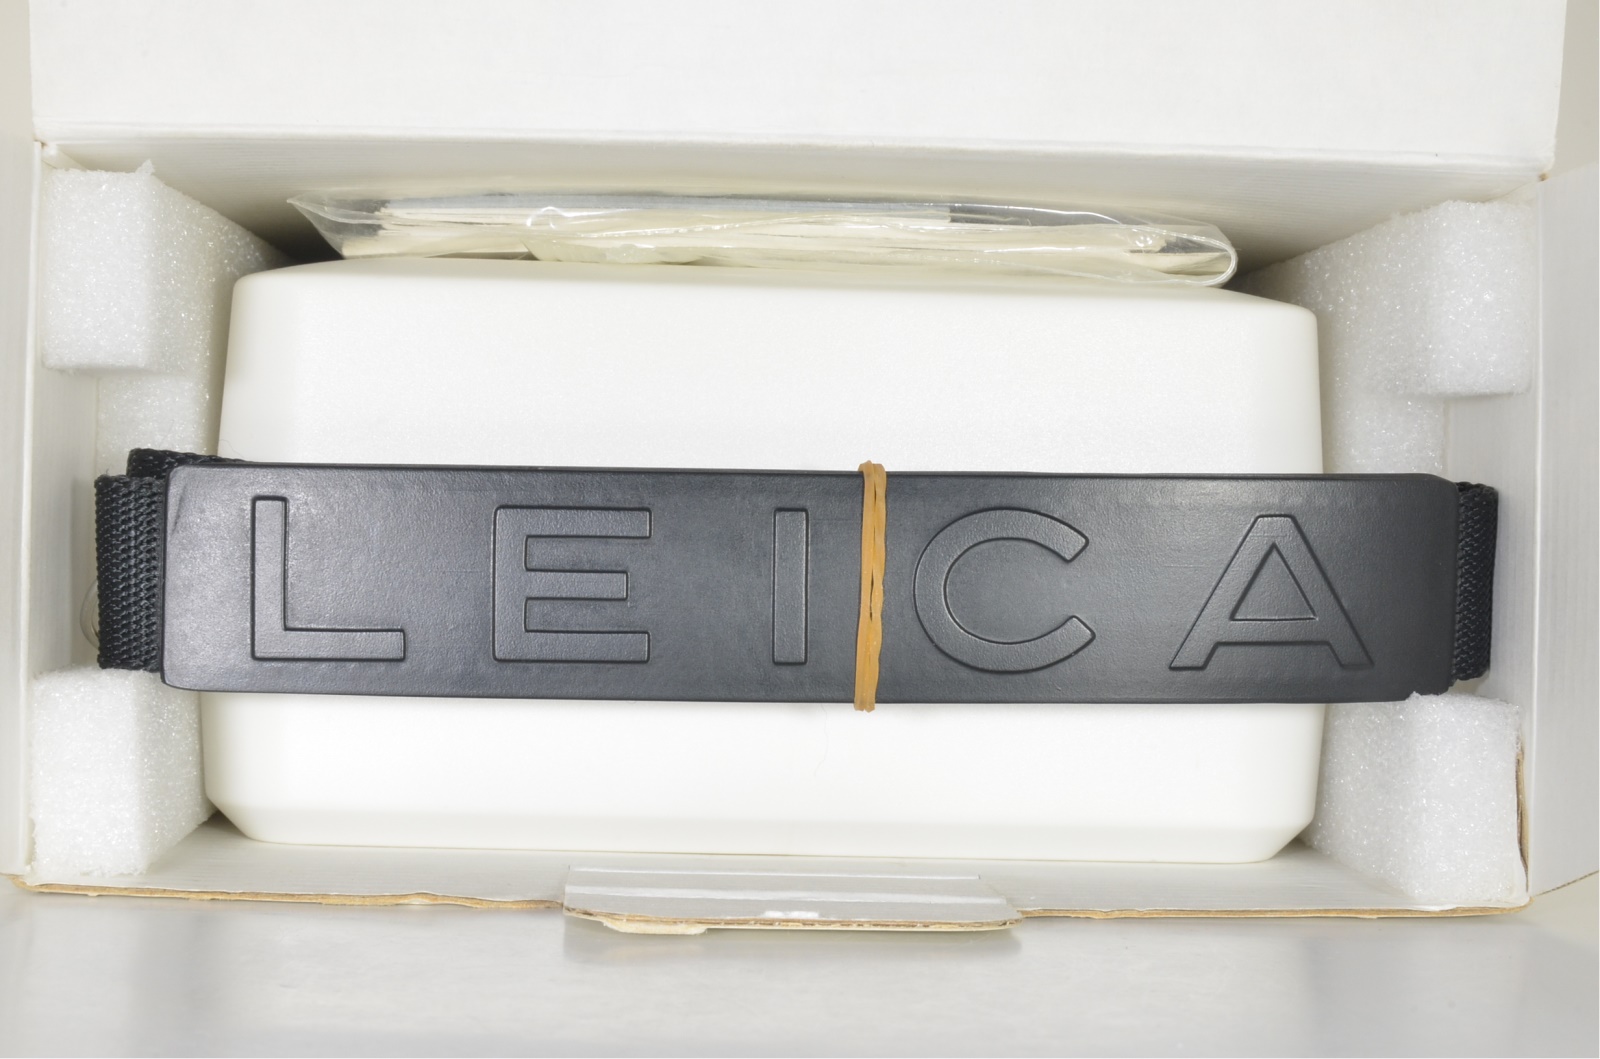 Leica M6 Empty Box 10414, Plastic Case, Strap, and documents from 